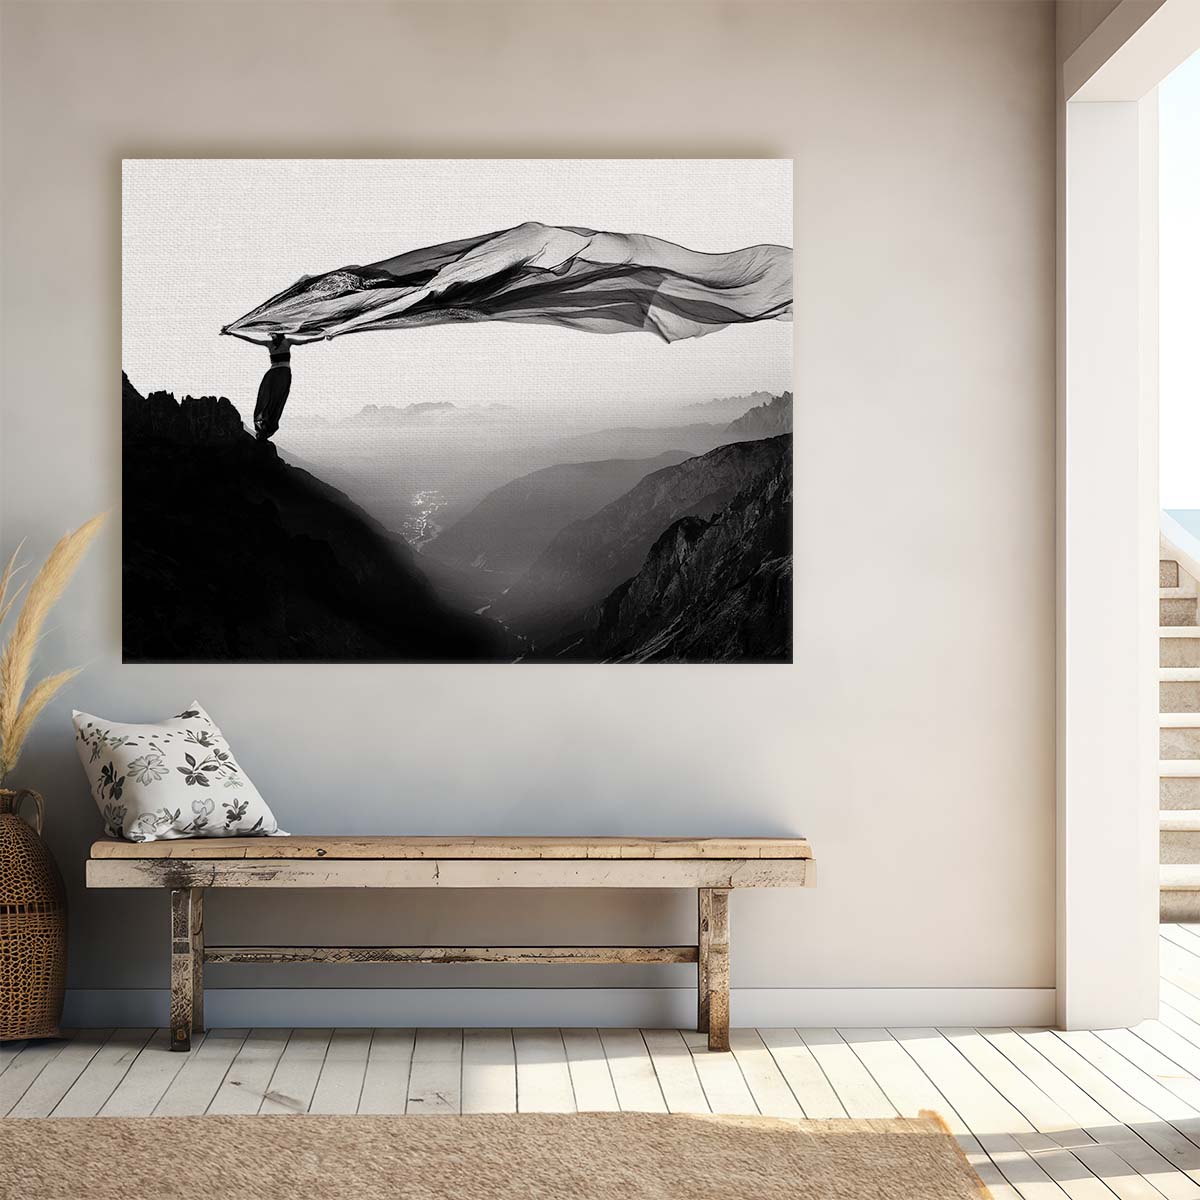 Monochrome Girl Conquering Windy Mountain Landscape Wall Art by Luxuriance Designs. Made in USA.